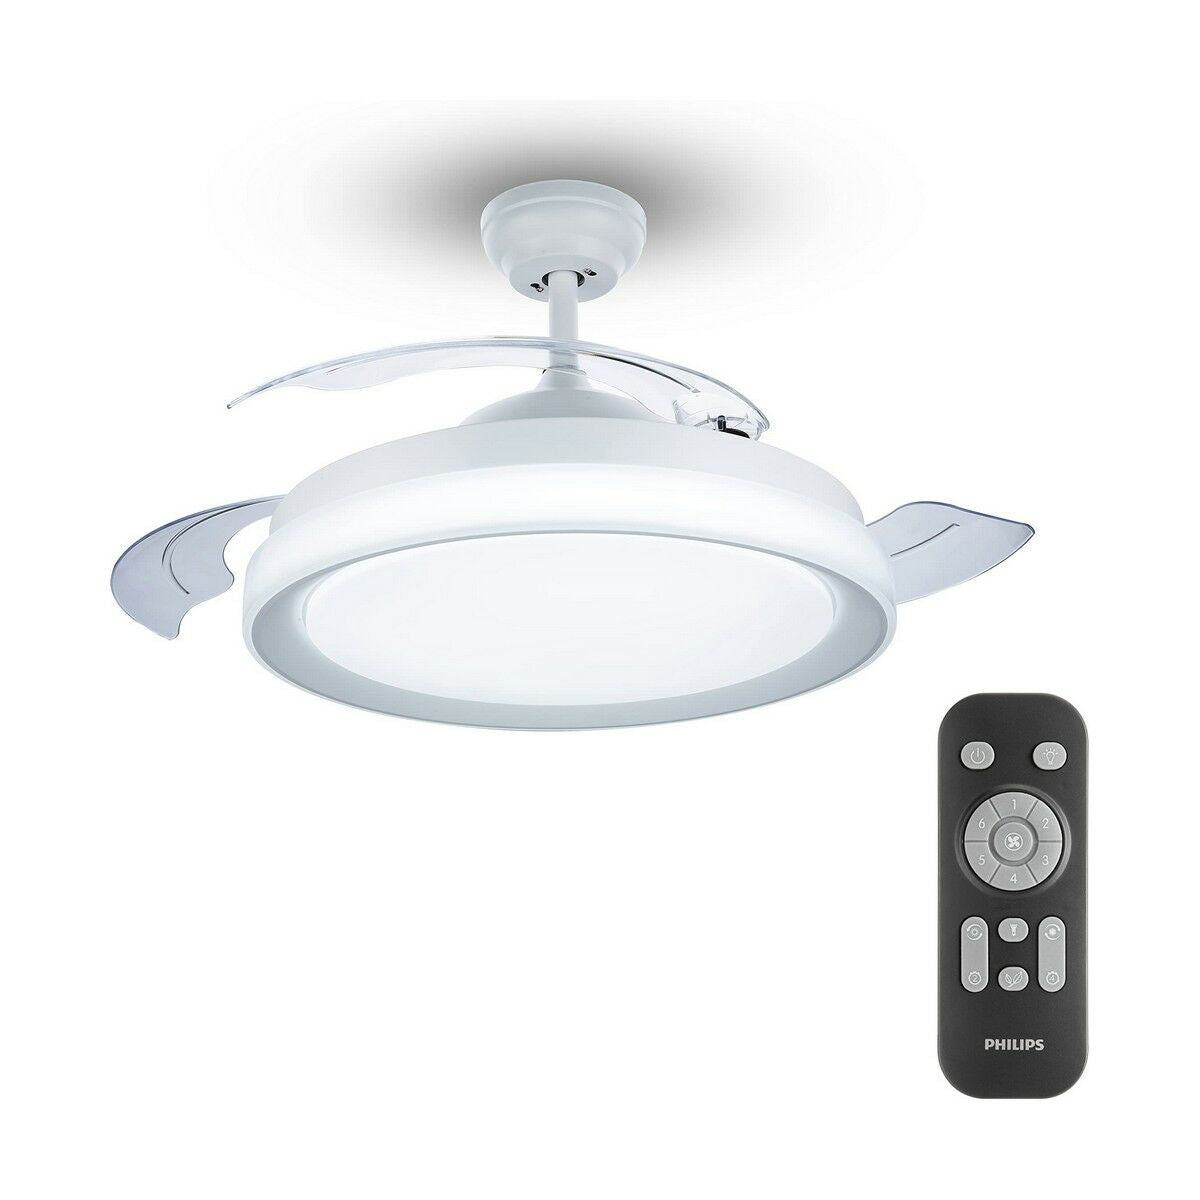 Ceiling Fan with Light Philips Lighting Bliss White 4500 Lm (2700k) (4000 K), Philips, Lighting, Indoor lighting, ceiling-fan-with-light-philips-lighting-bliss-white-4500-lm-2700k-4000-k, Brand_Philips, category-reference-2399, category-reference-2450, category-reference-2451, category-reference-t-10333, category-reference-t-10347, category-reference-t-19657, Condition_NEW, led / lighting, Price_100 - 200, small electric appliances, summer, RiotNook